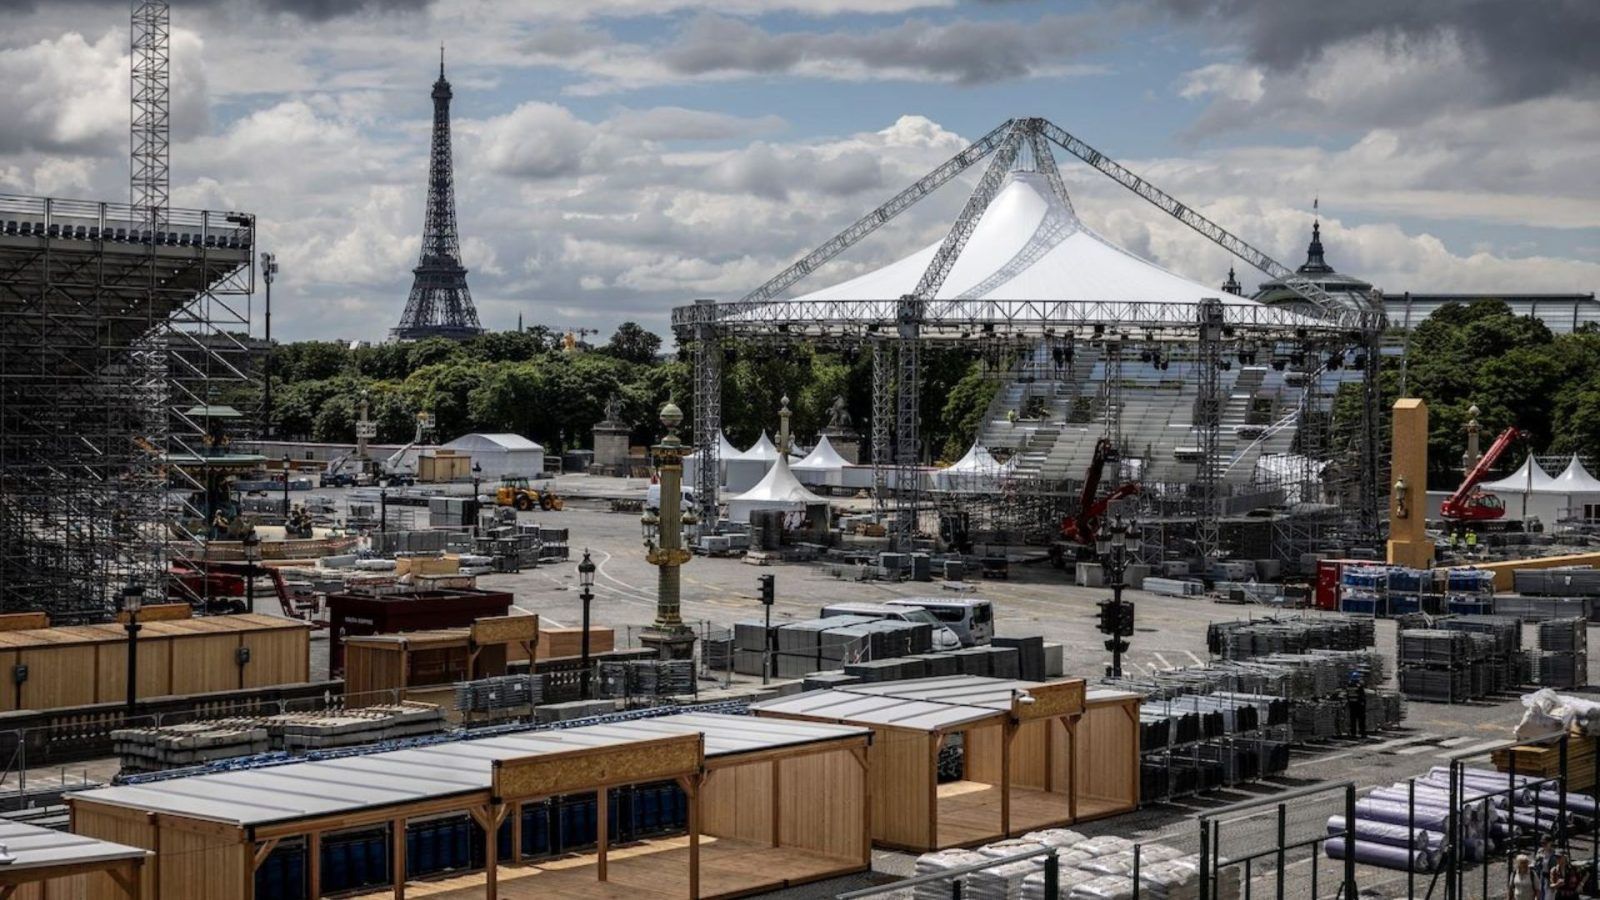 Check out the famous venues of the 2024 Olympic Games in Paris